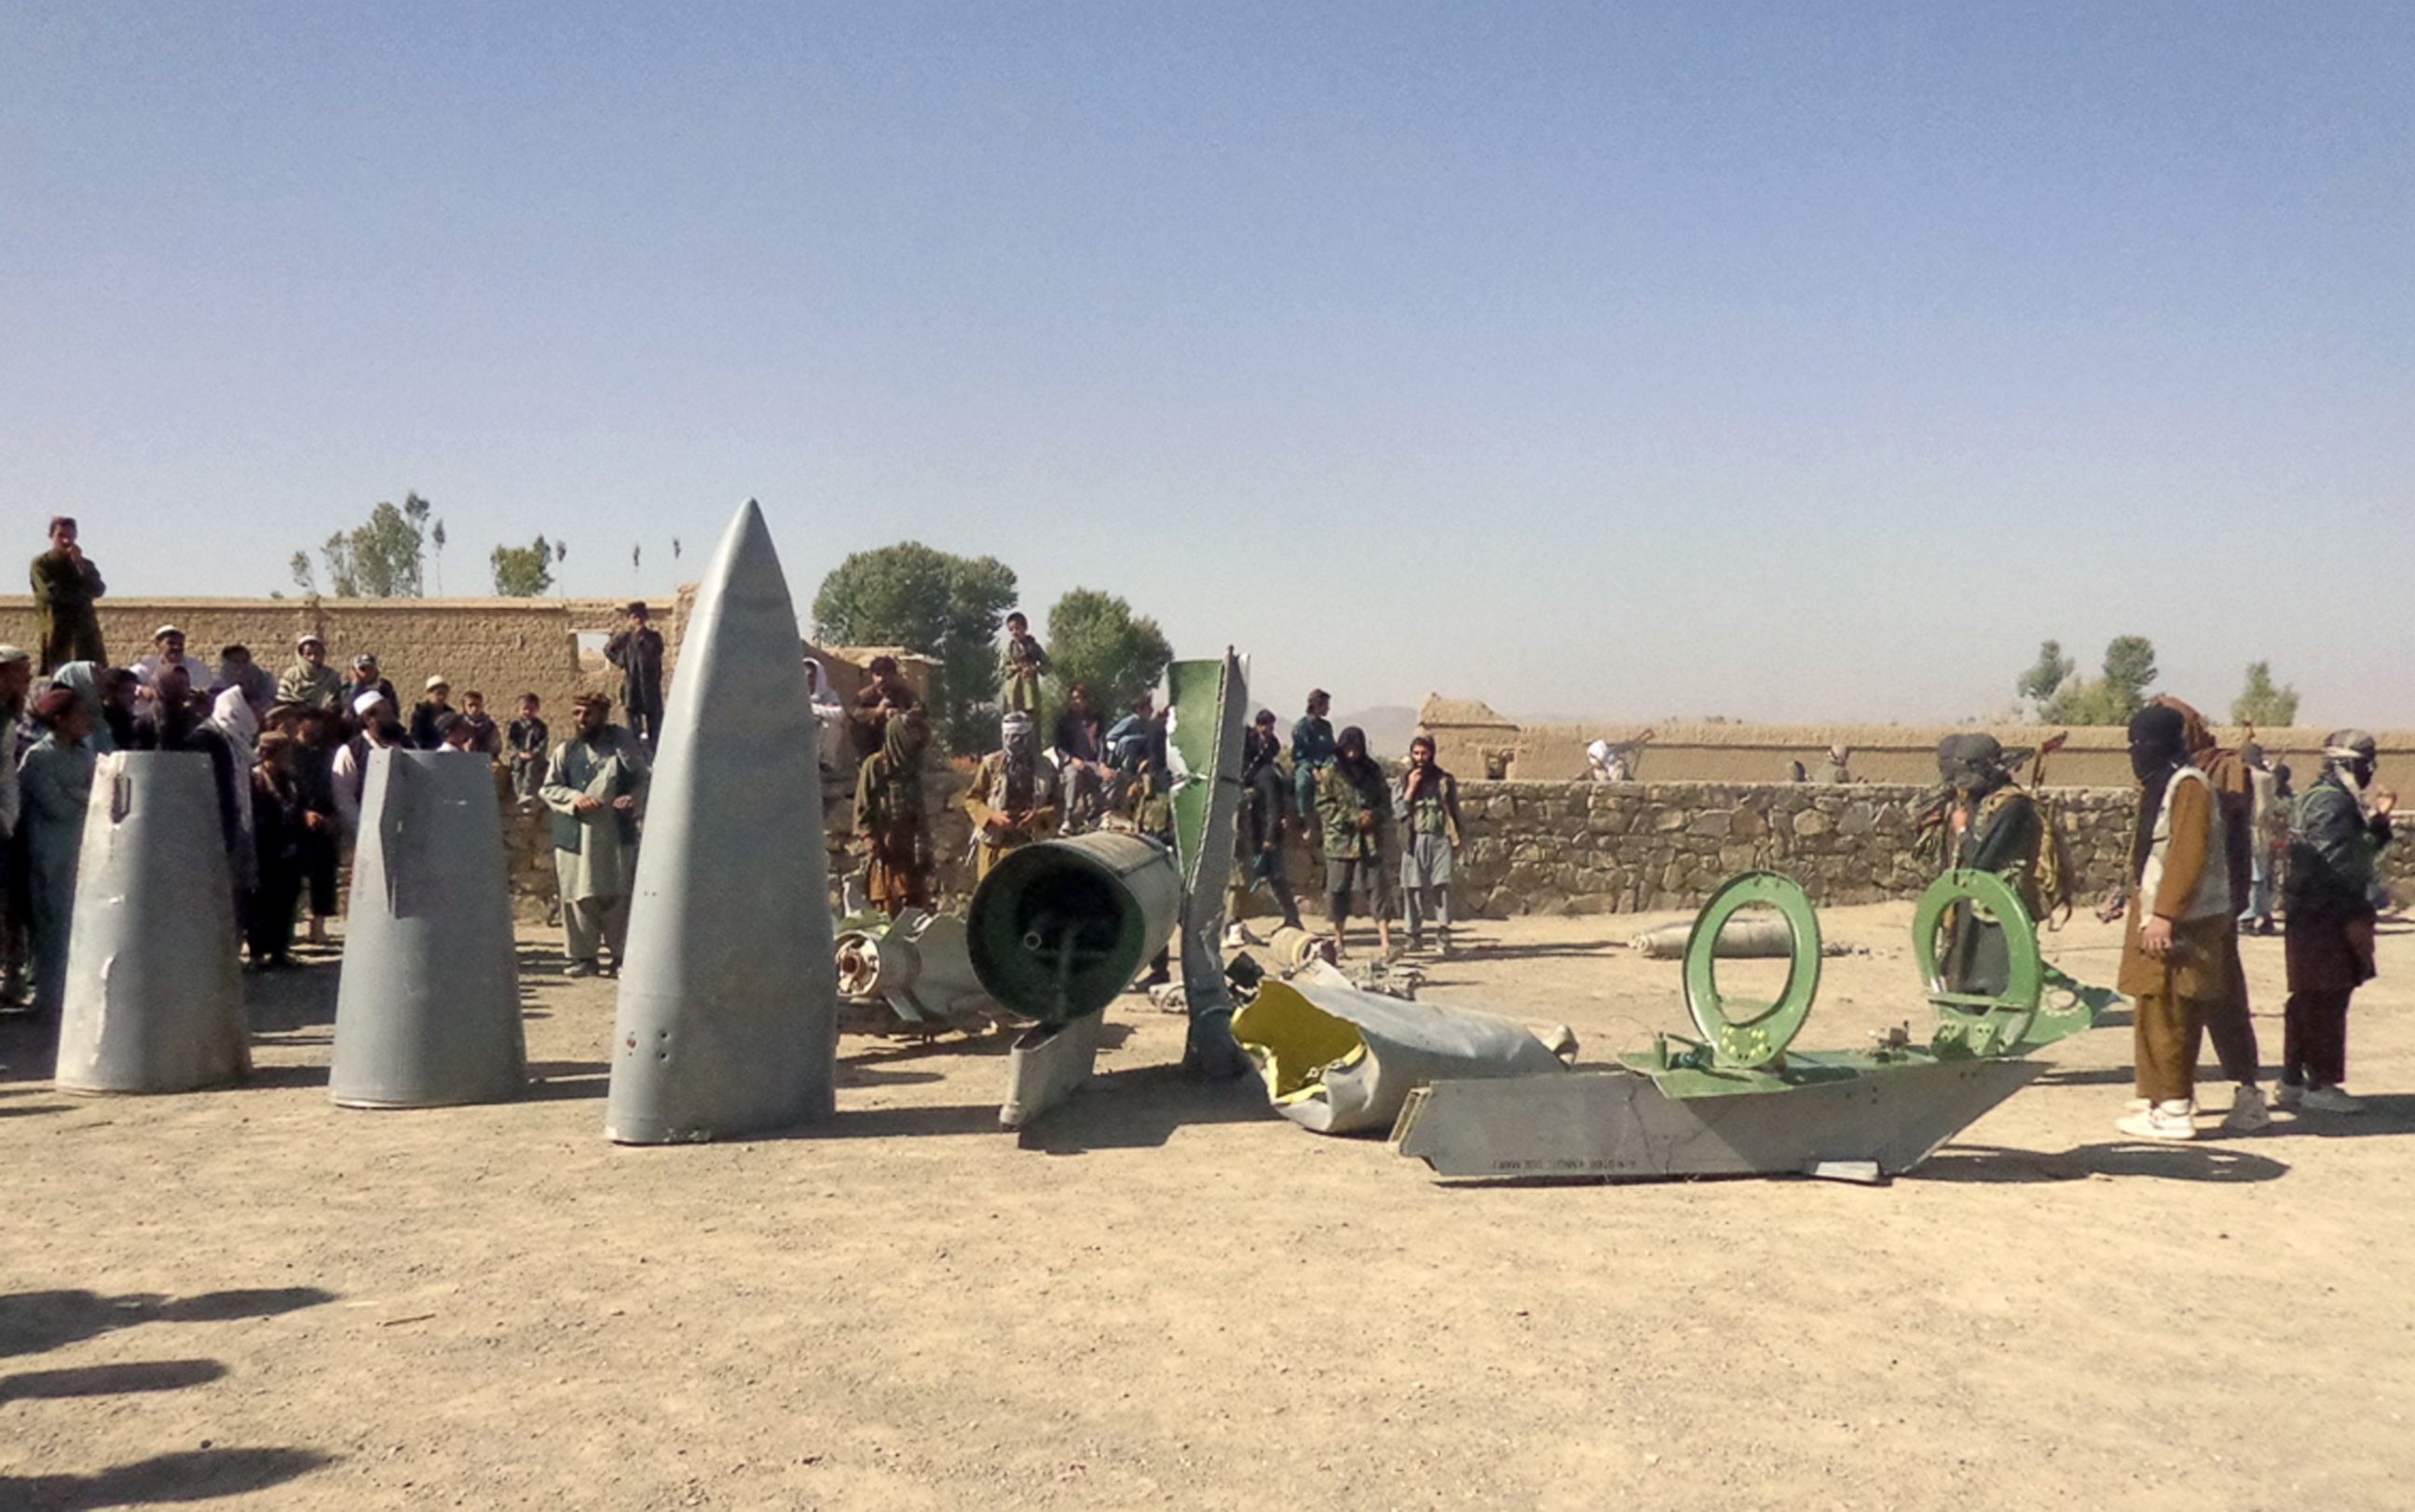 PHOTO: In this photograph taken on Oct.13, 2015, Afghan Taliban militants gather around parts of a US F-16 aircraft that was struck over in Sayid Karam district of eastern Paktia province.